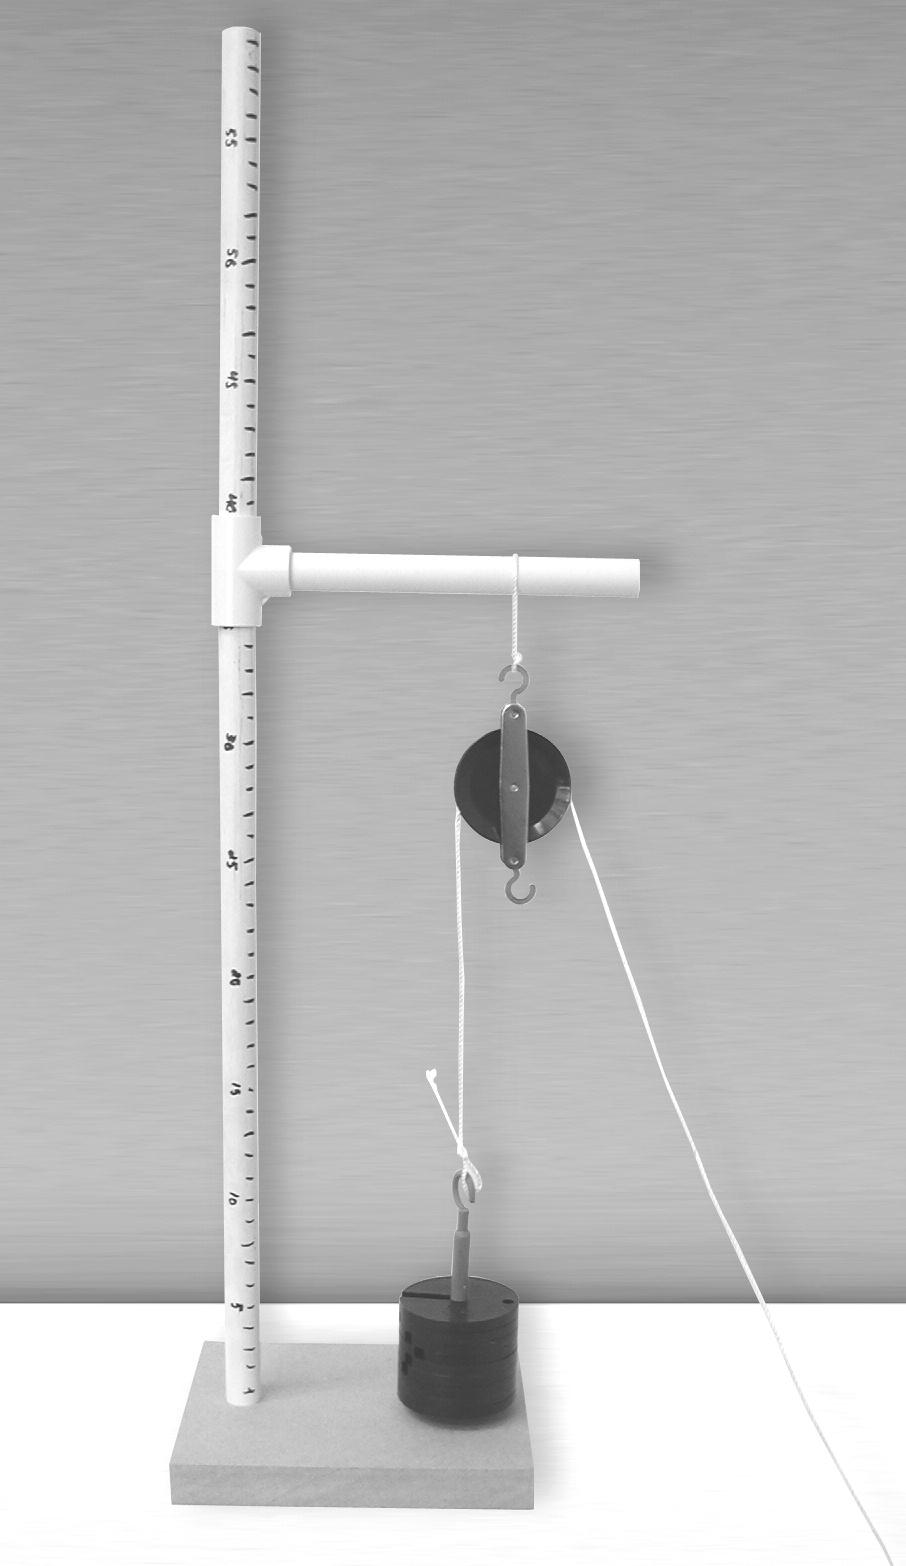 5. Thread the pulley cord over the groove of the hanging single pulley. 6. Tie a loop at one end of the pulley cord. Place the loop around the hook of the hanging mass.